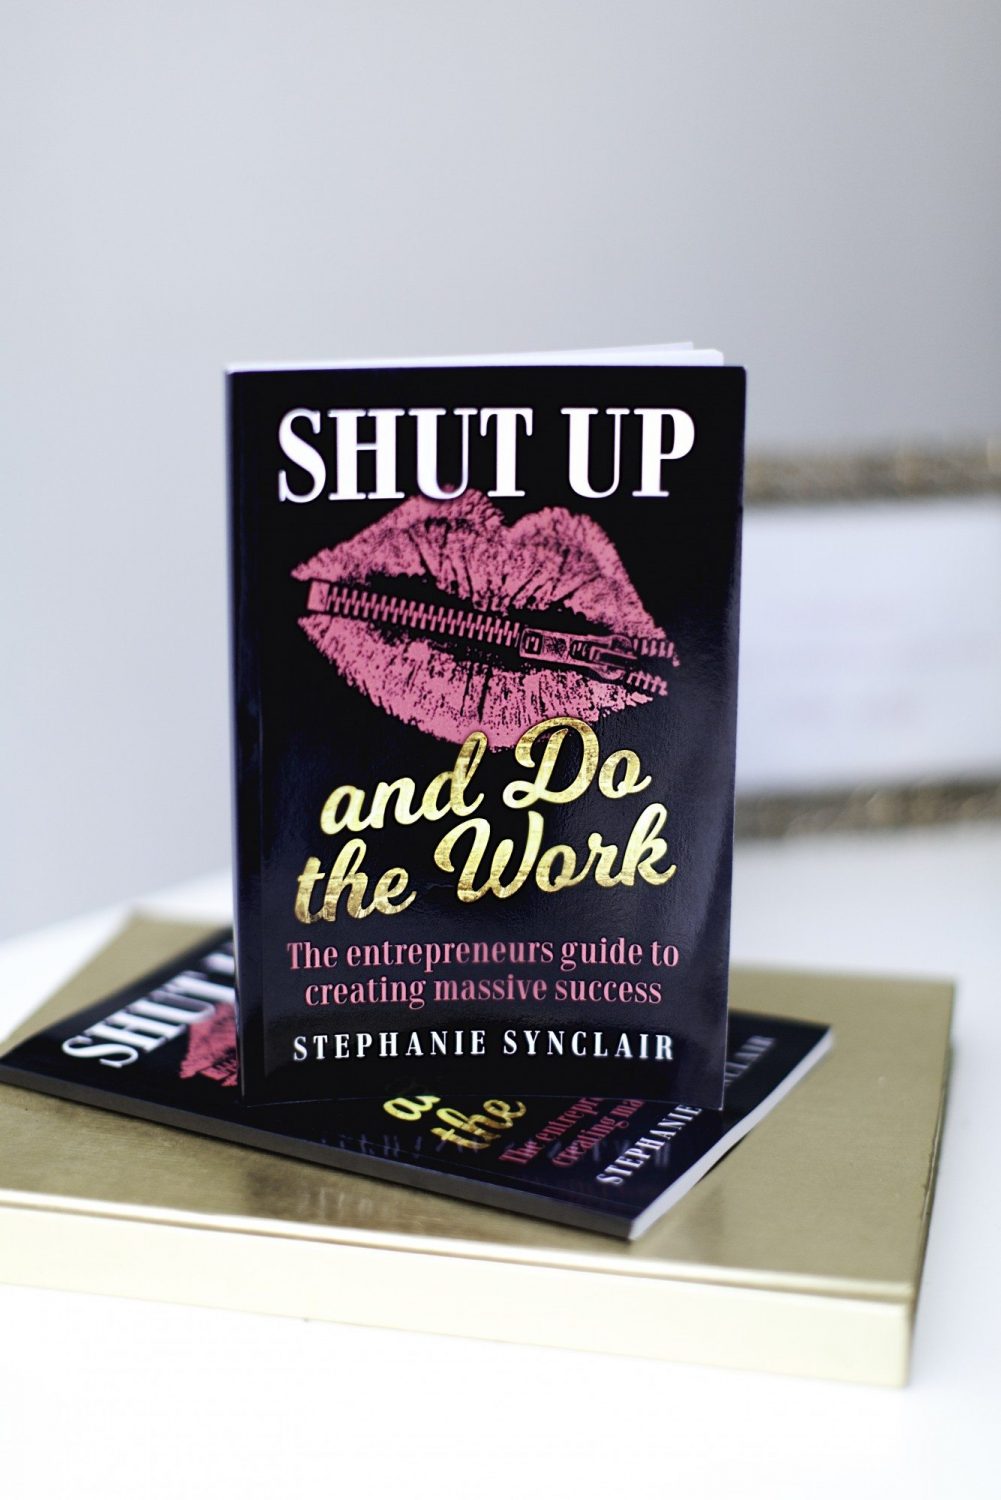 Author Stephanie Synclair on her new book “Shut Up And Do The Work,” productivity and more